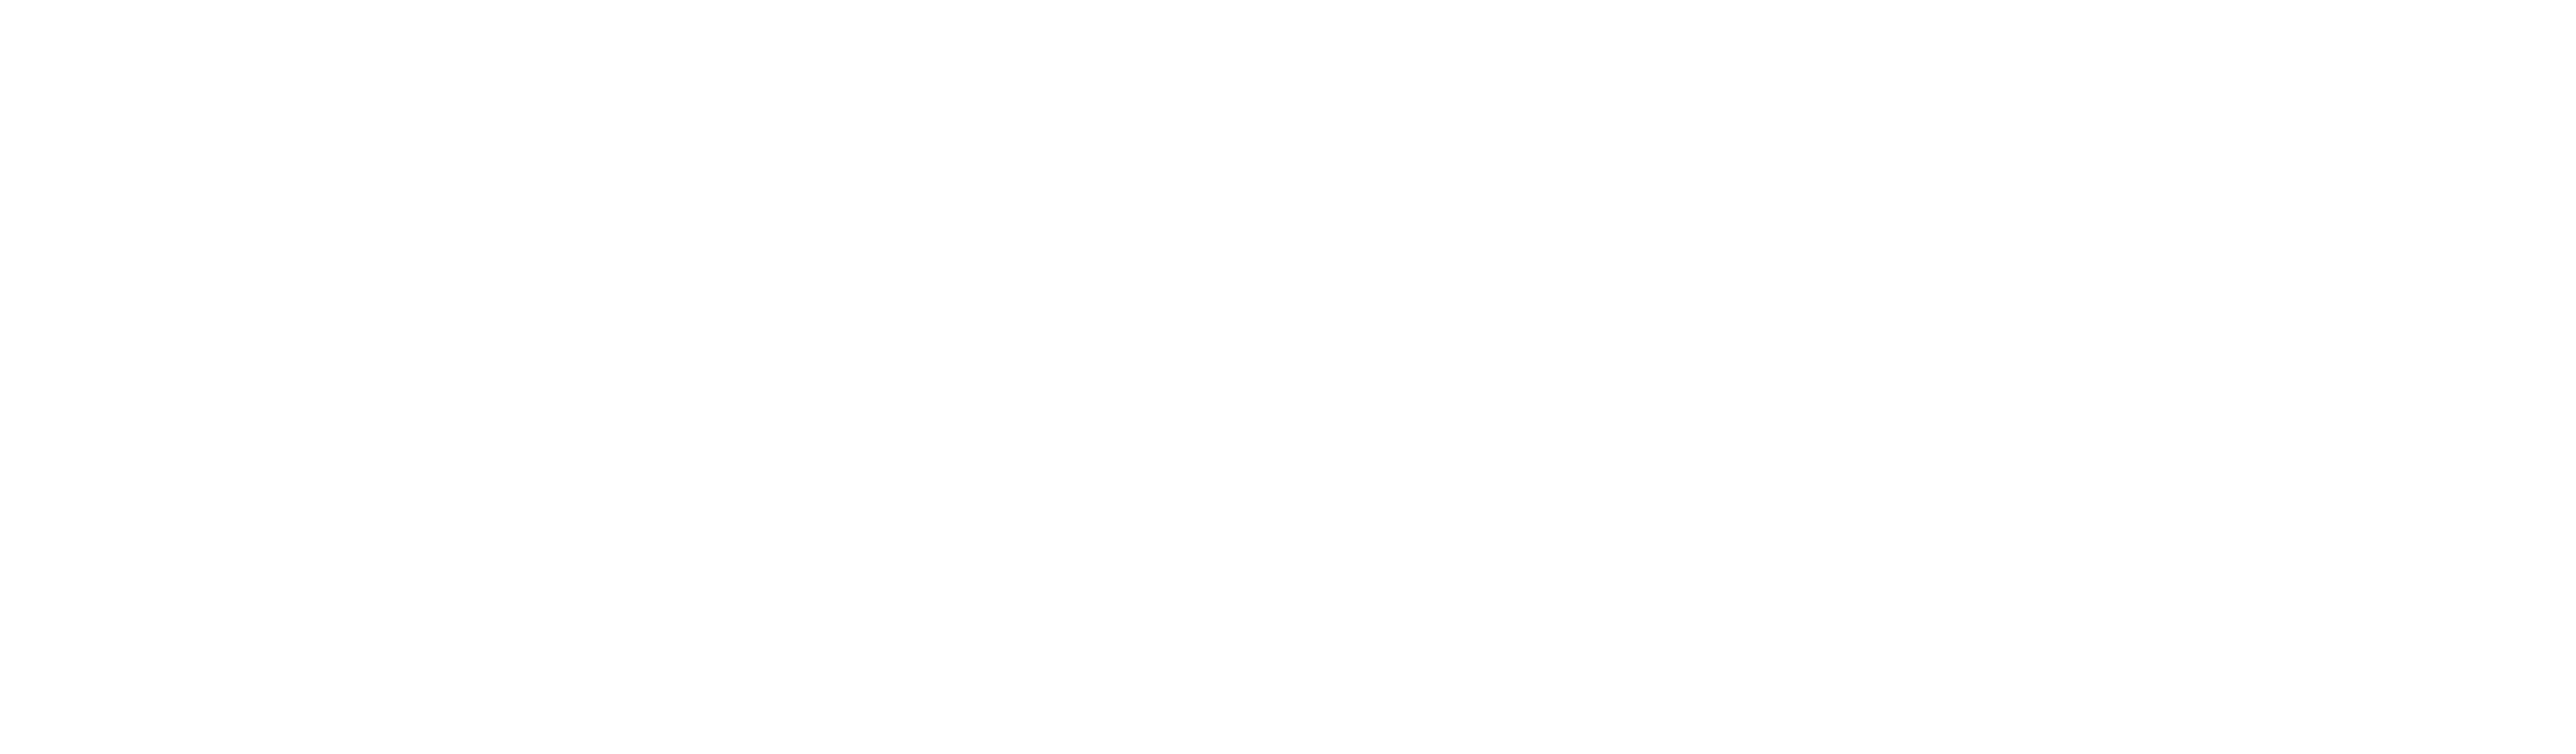 Brothers Take New Orleans logo